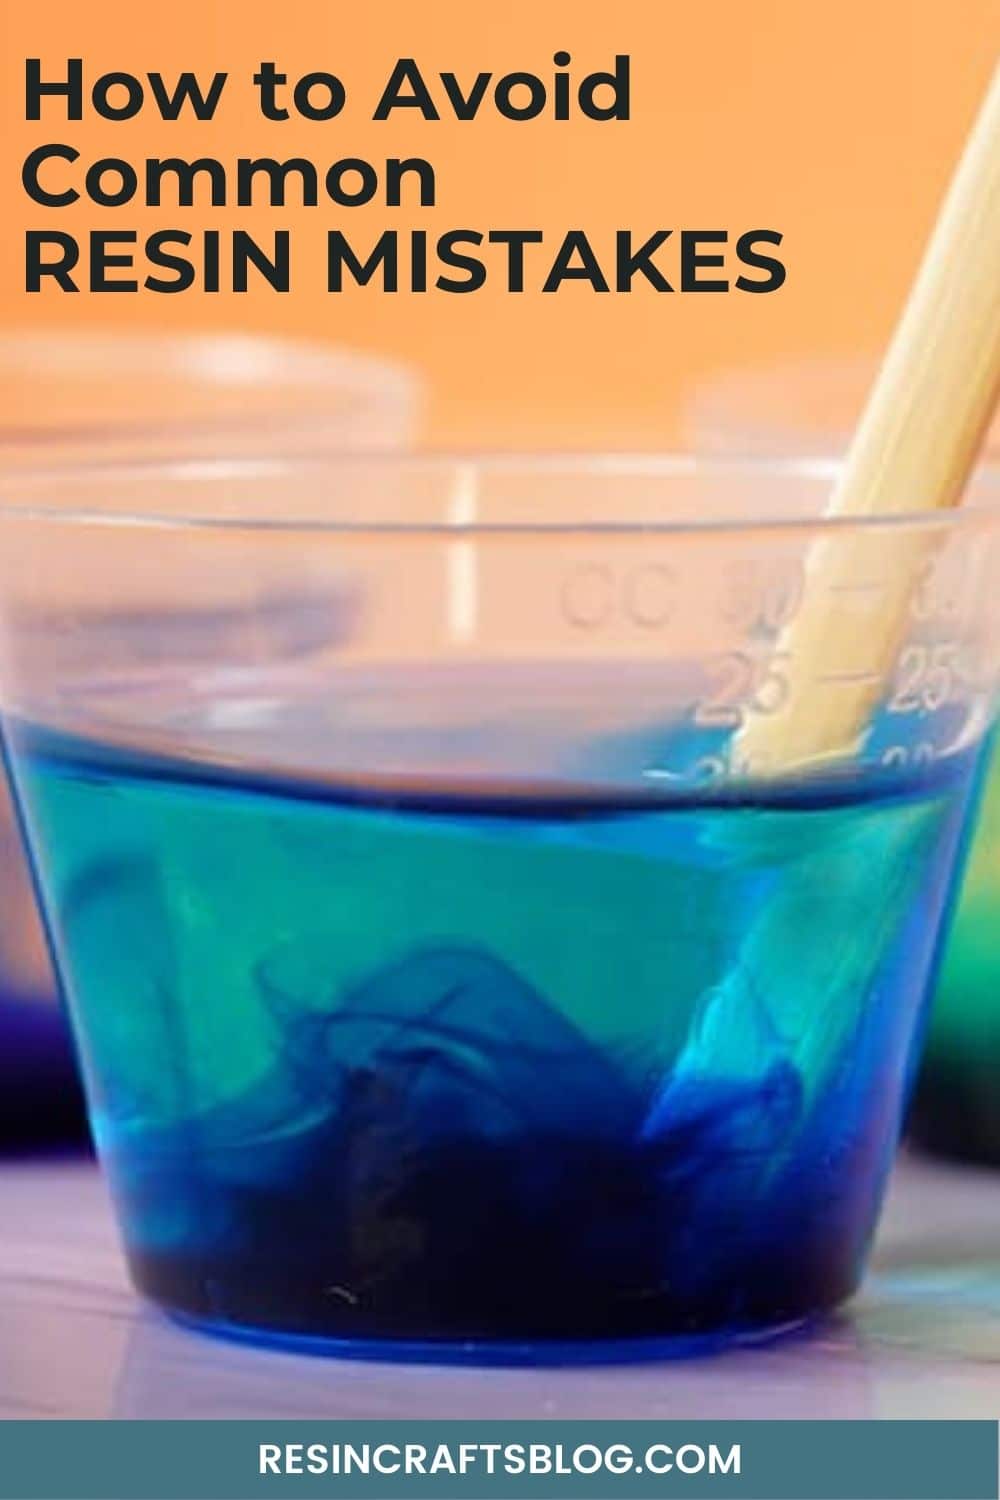 New Resin Mistakes and how to avoid them! via @resincraftsblog